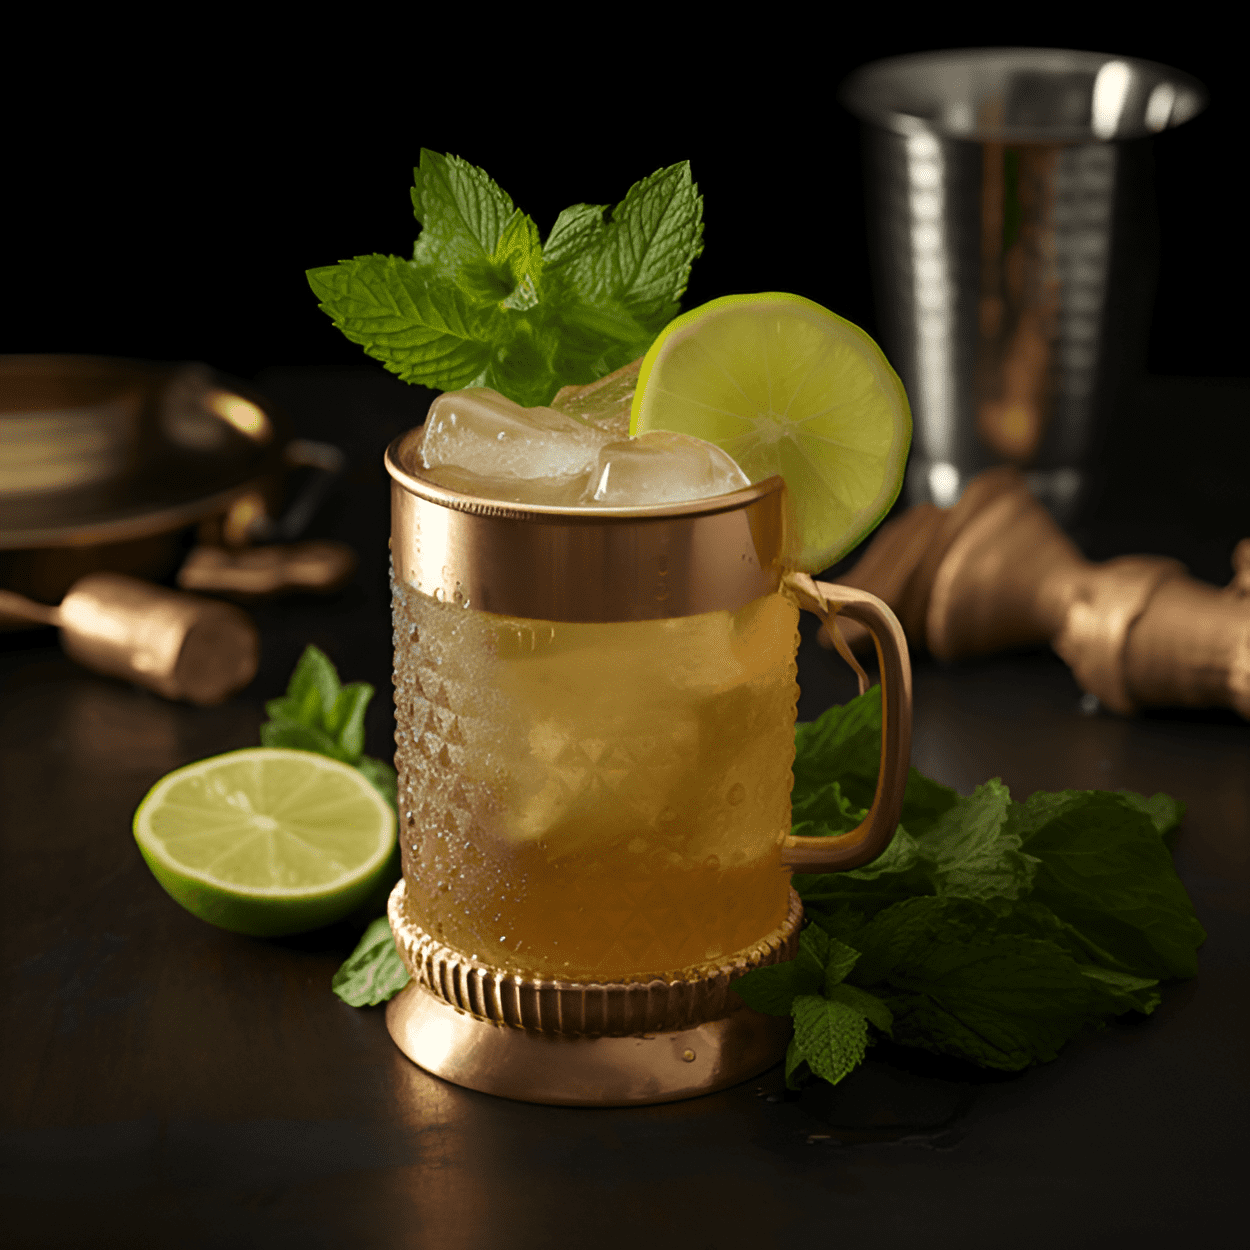 Rum Mule Cocktail Recipe - The Rum Mule is a refreshing, citrusy cocktail with a strong, spicy kick from the ginger beer. The rum adds a sweet, smooth undertone that balances the tanginess of the lime.